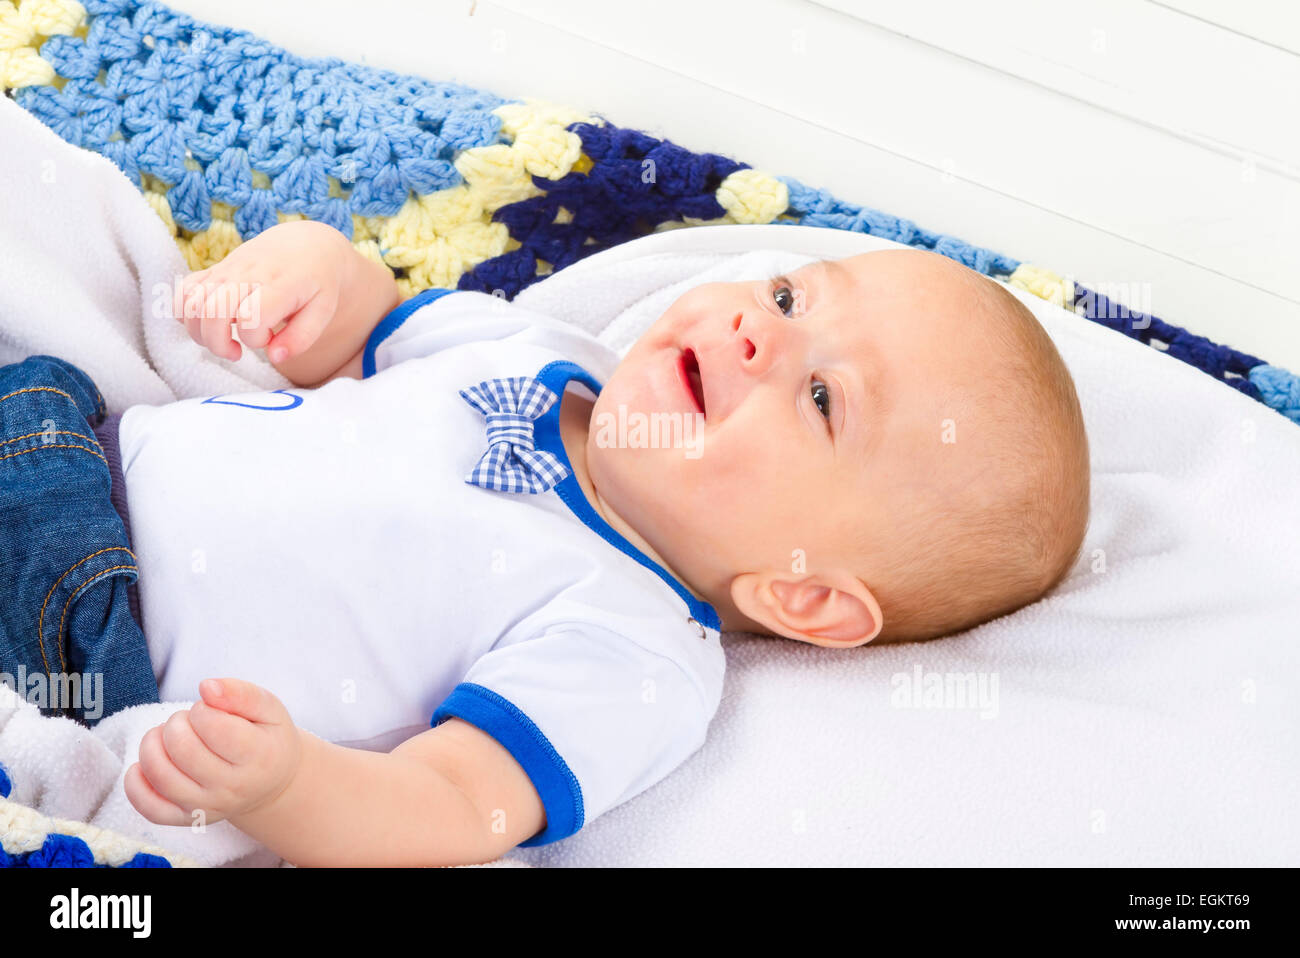 Cute baby boy laughing on white blanket Stock Photo